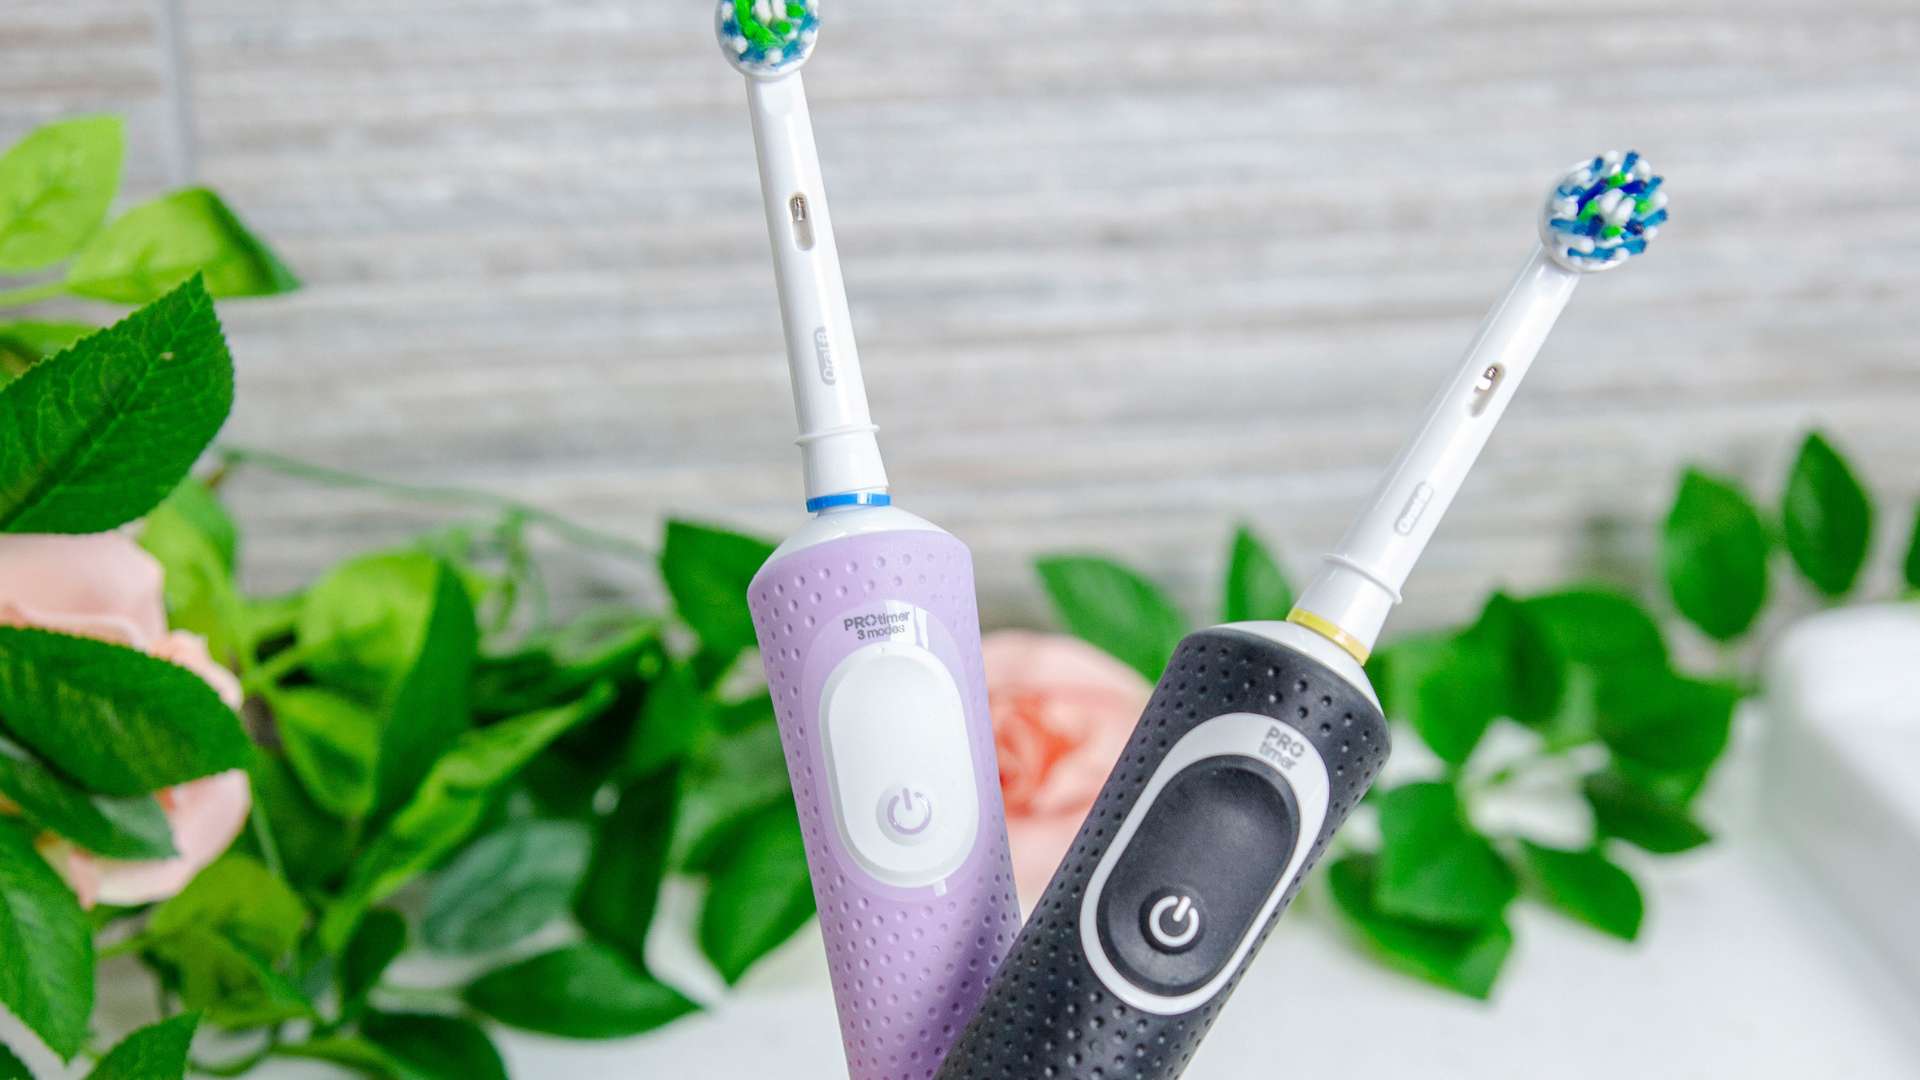 Oral-B Vitality Plus review: The brush to buy if you're on a tight budget